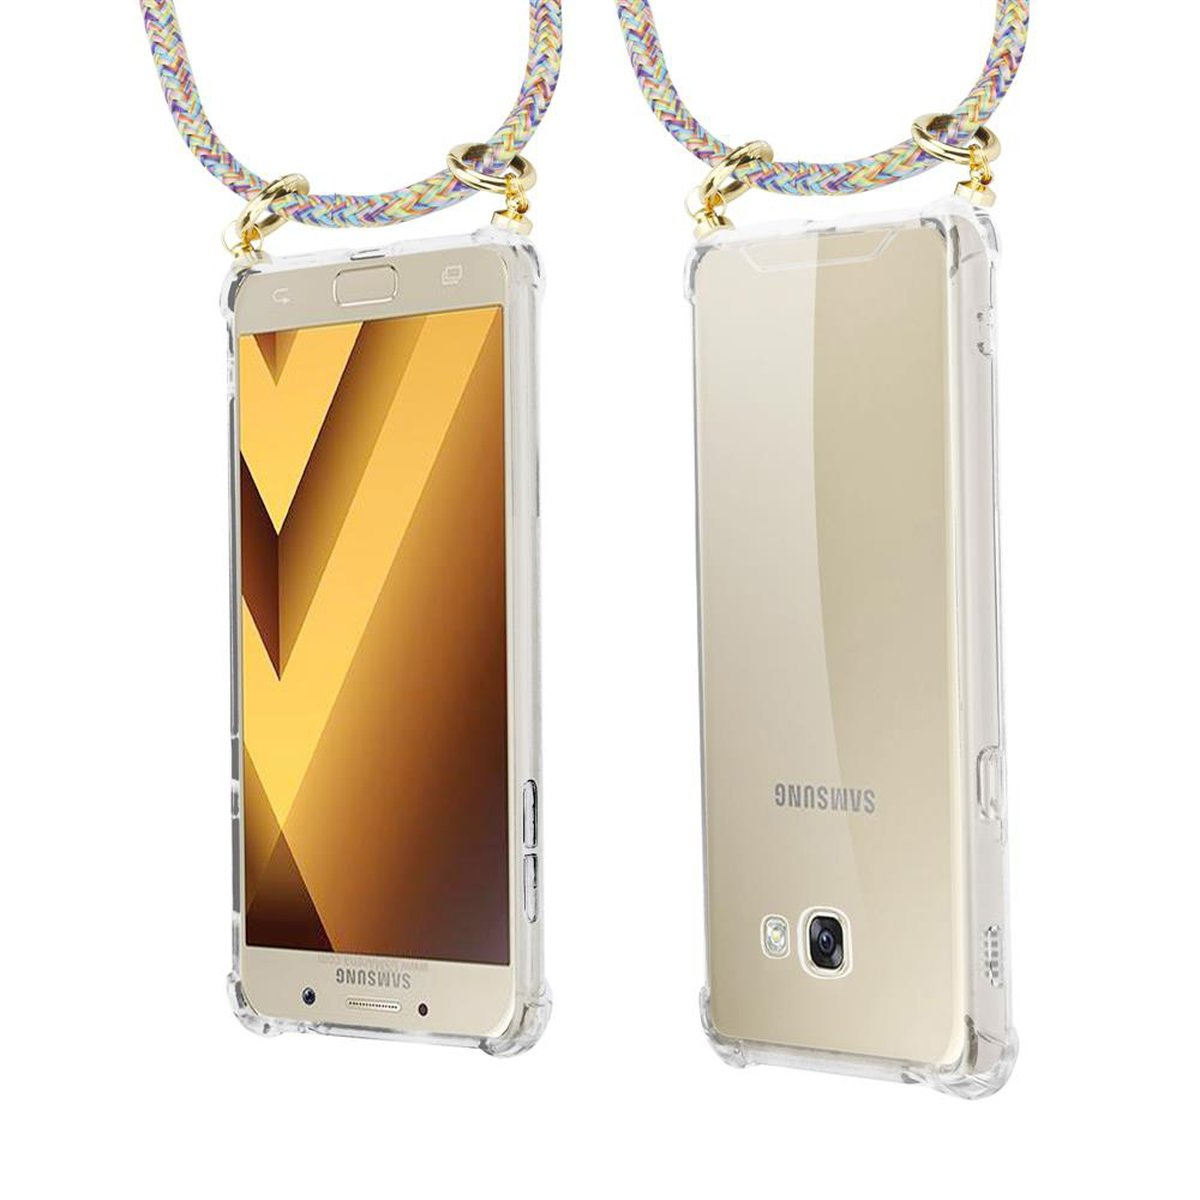 CADORABO Handy Kette mit Gold Band A5 2017, Samsung, Galaxy Backcover, Ringen, und Hülle, RAINBOW abnehmbarer Kordel